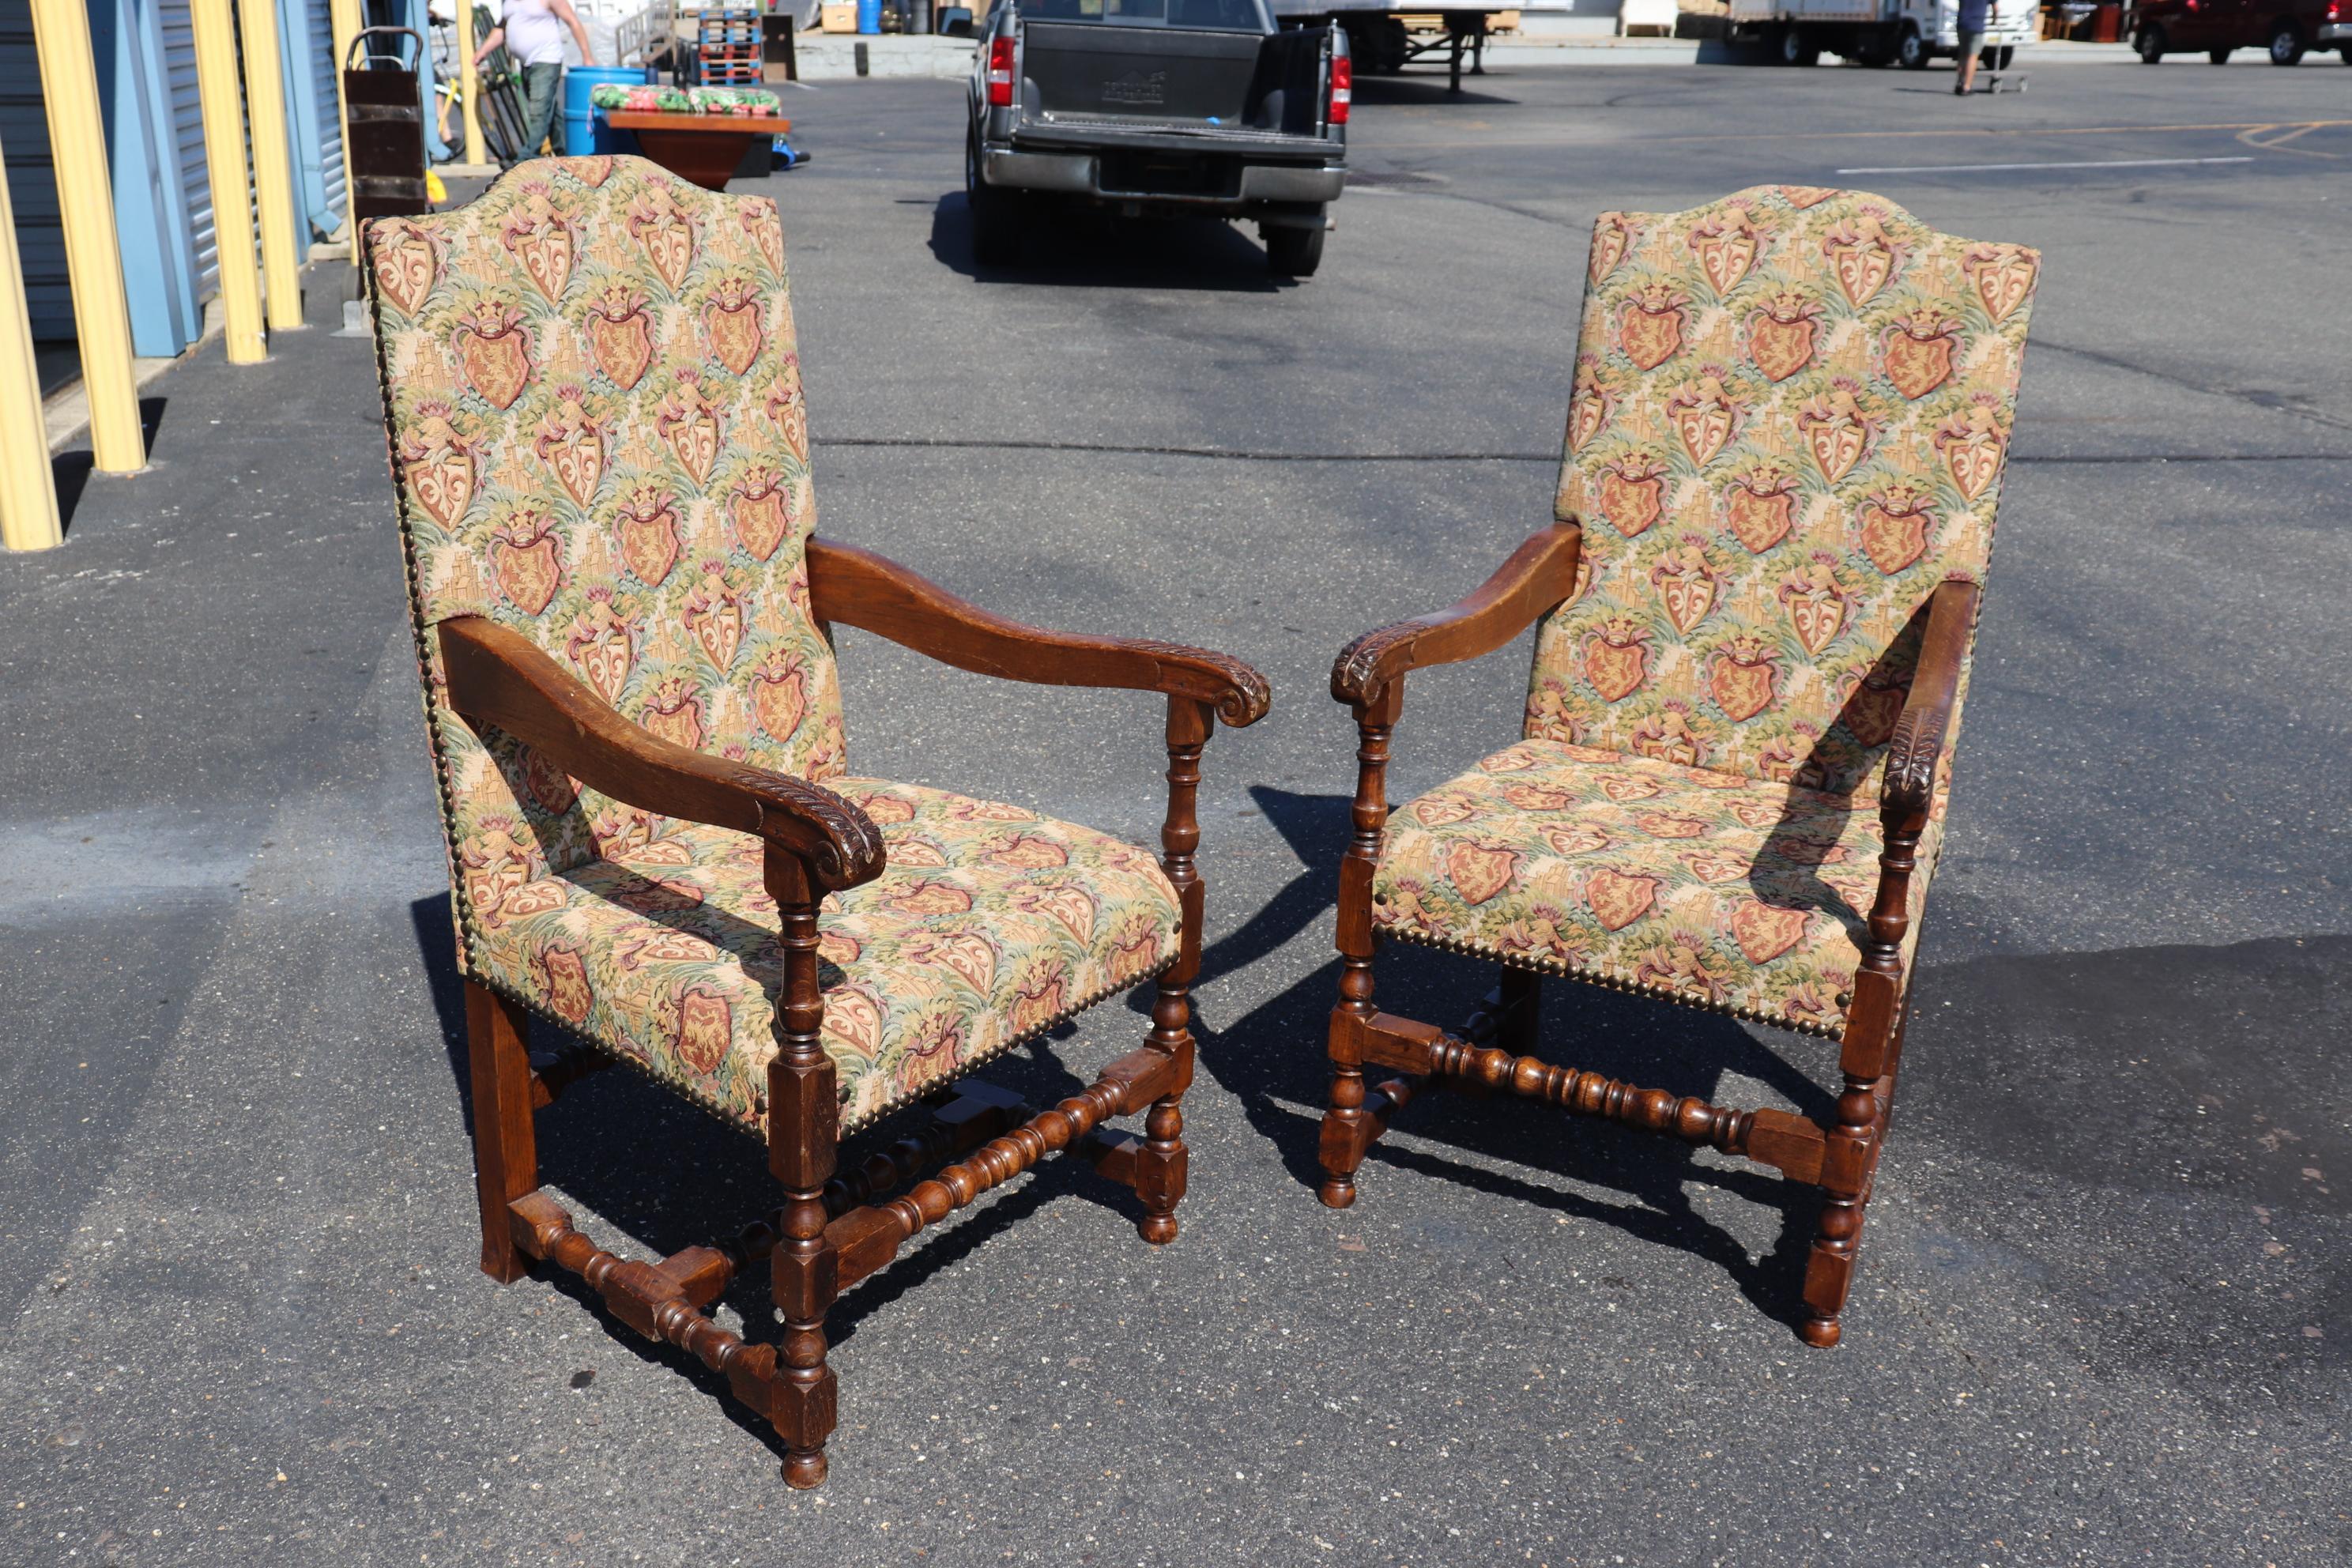 This is a gorgeous pair of carved oak heavy throne or dining head chairs. The chairs are in very good condition with beautiful machine-made tapestry upholstery and great solid frames and good carving. The chairs measure 48 tall x 26 wide x 30 deep